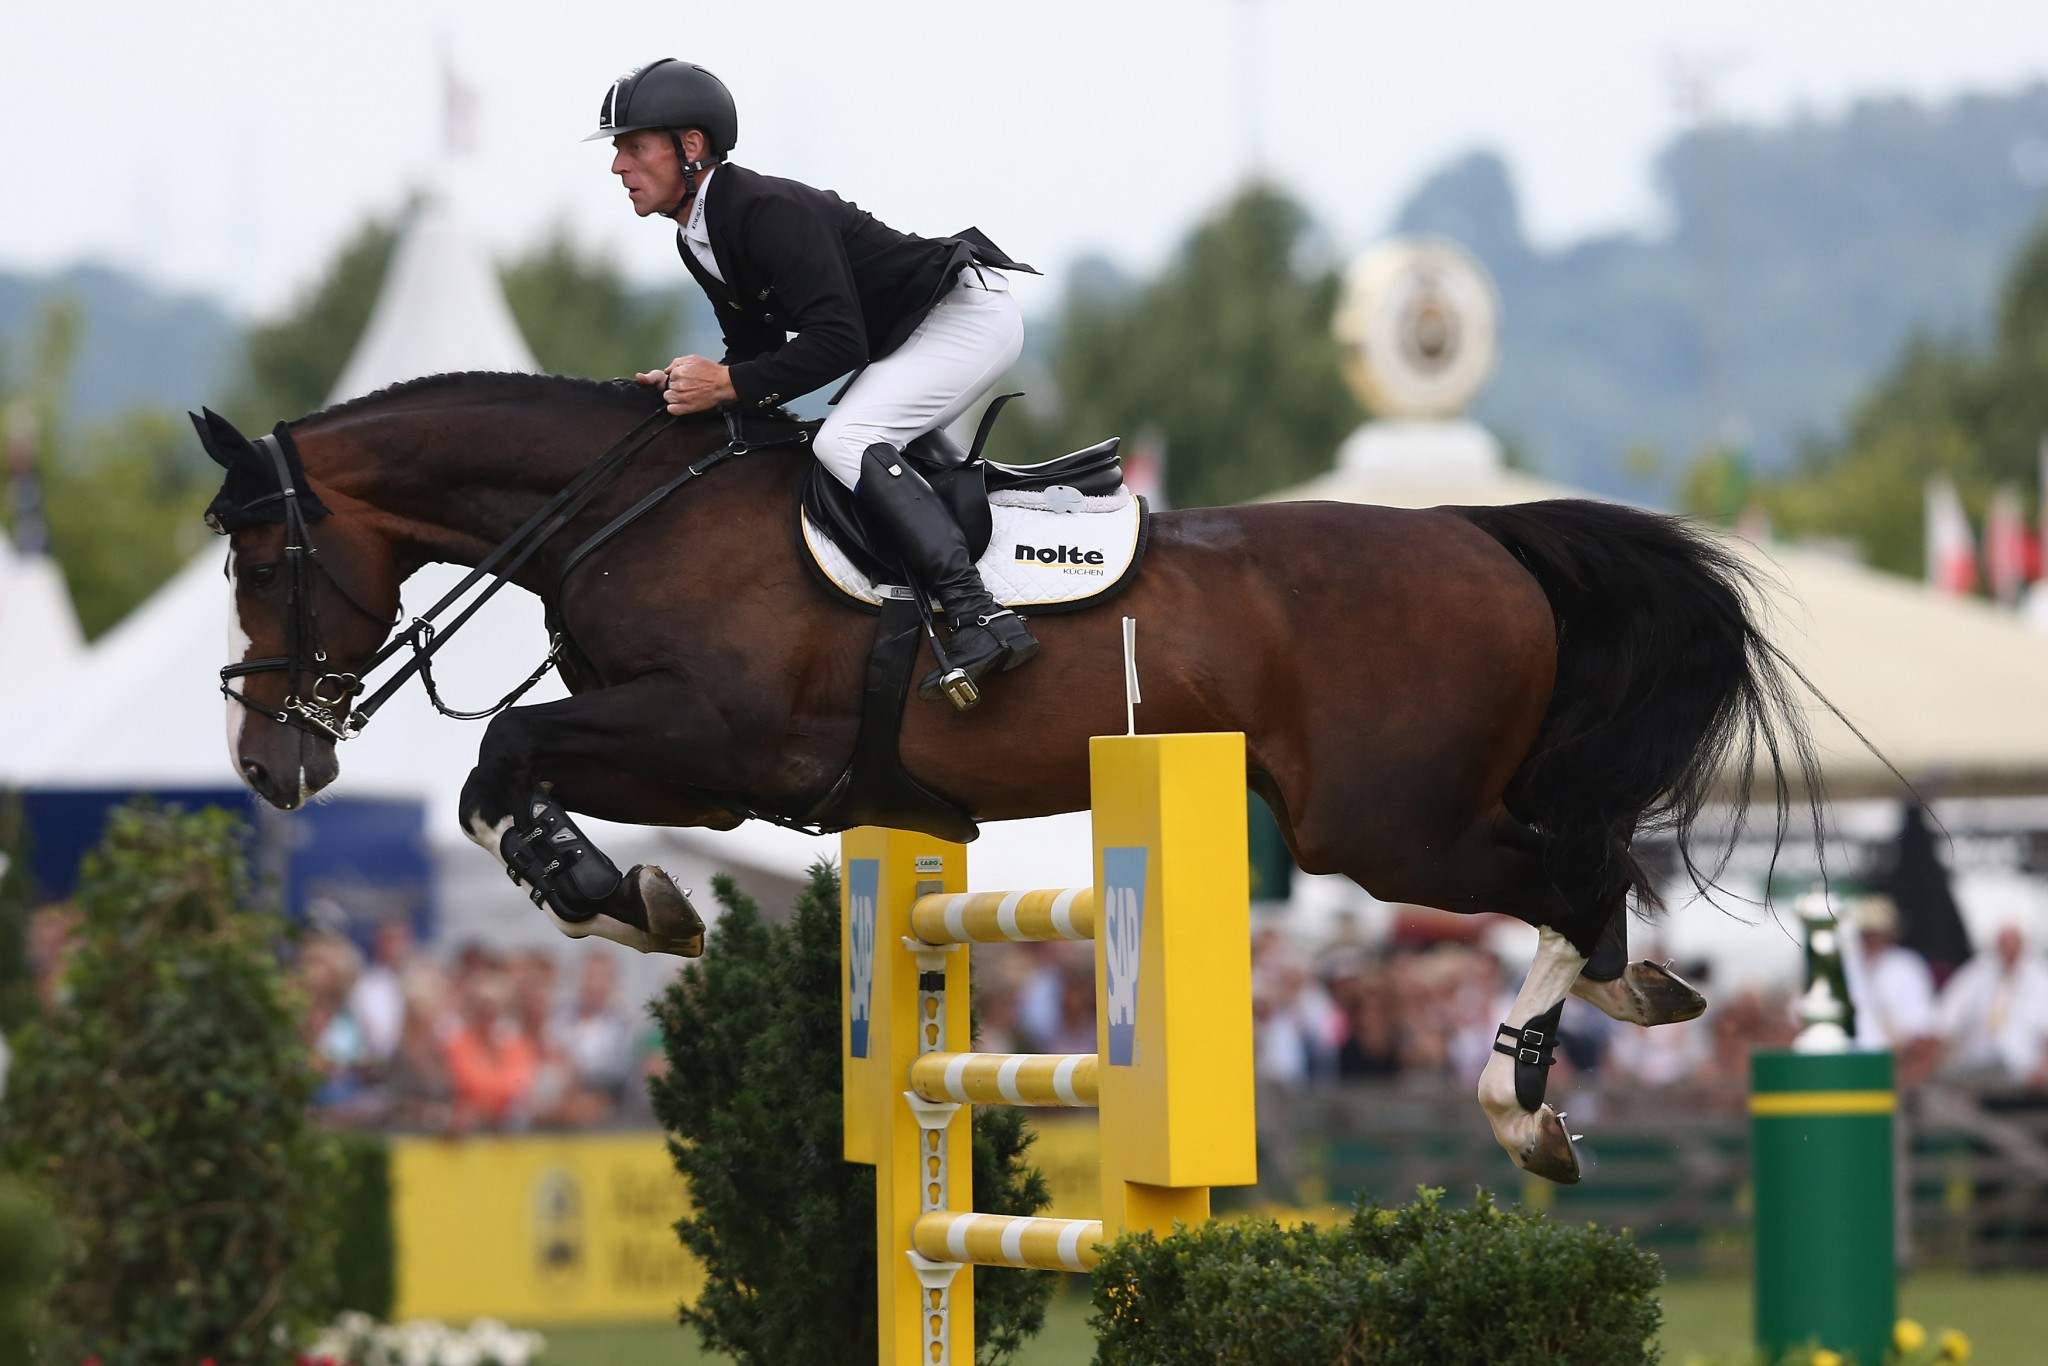 Germany's Marcus Ehning will go in search of a record fourth title at the FEI World Cup Jumping event in Las Vegas ©Getty Images